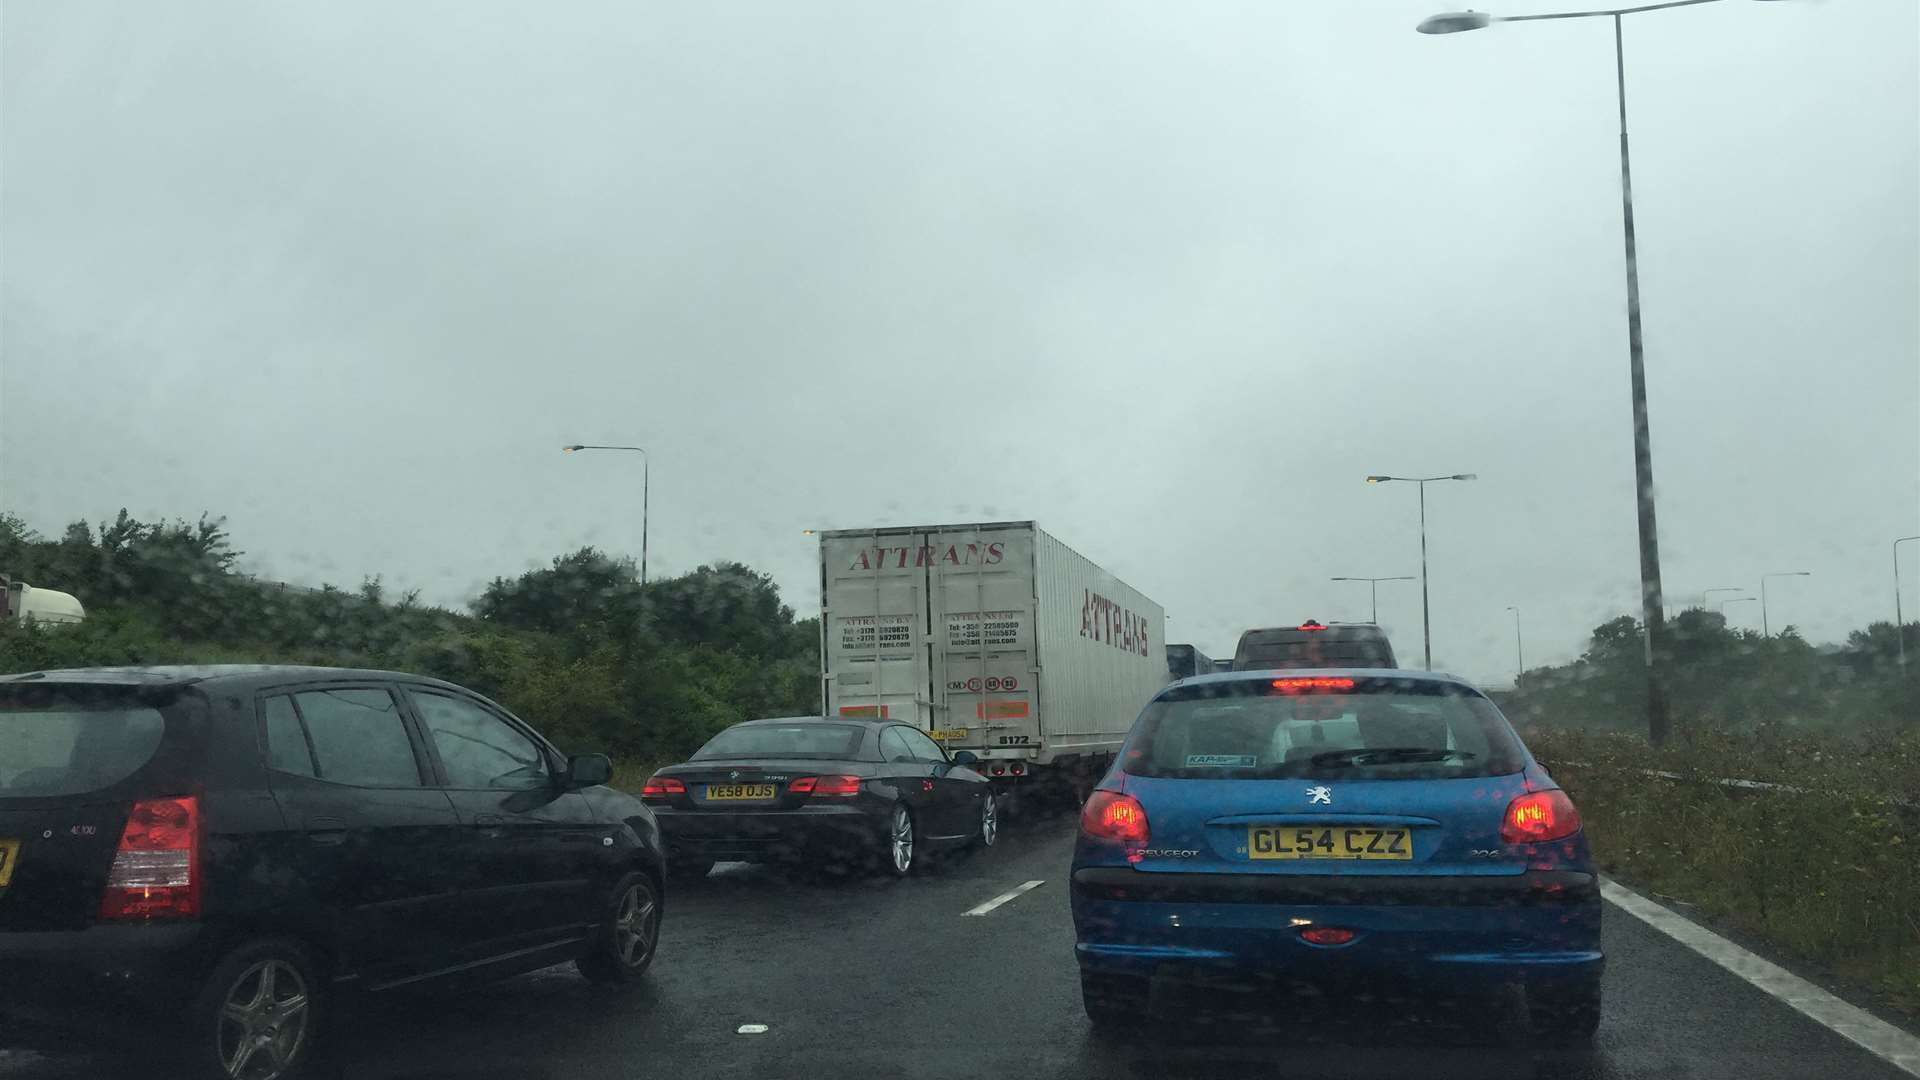 Traffic is tailing back to Folkestone following the earlier crashes